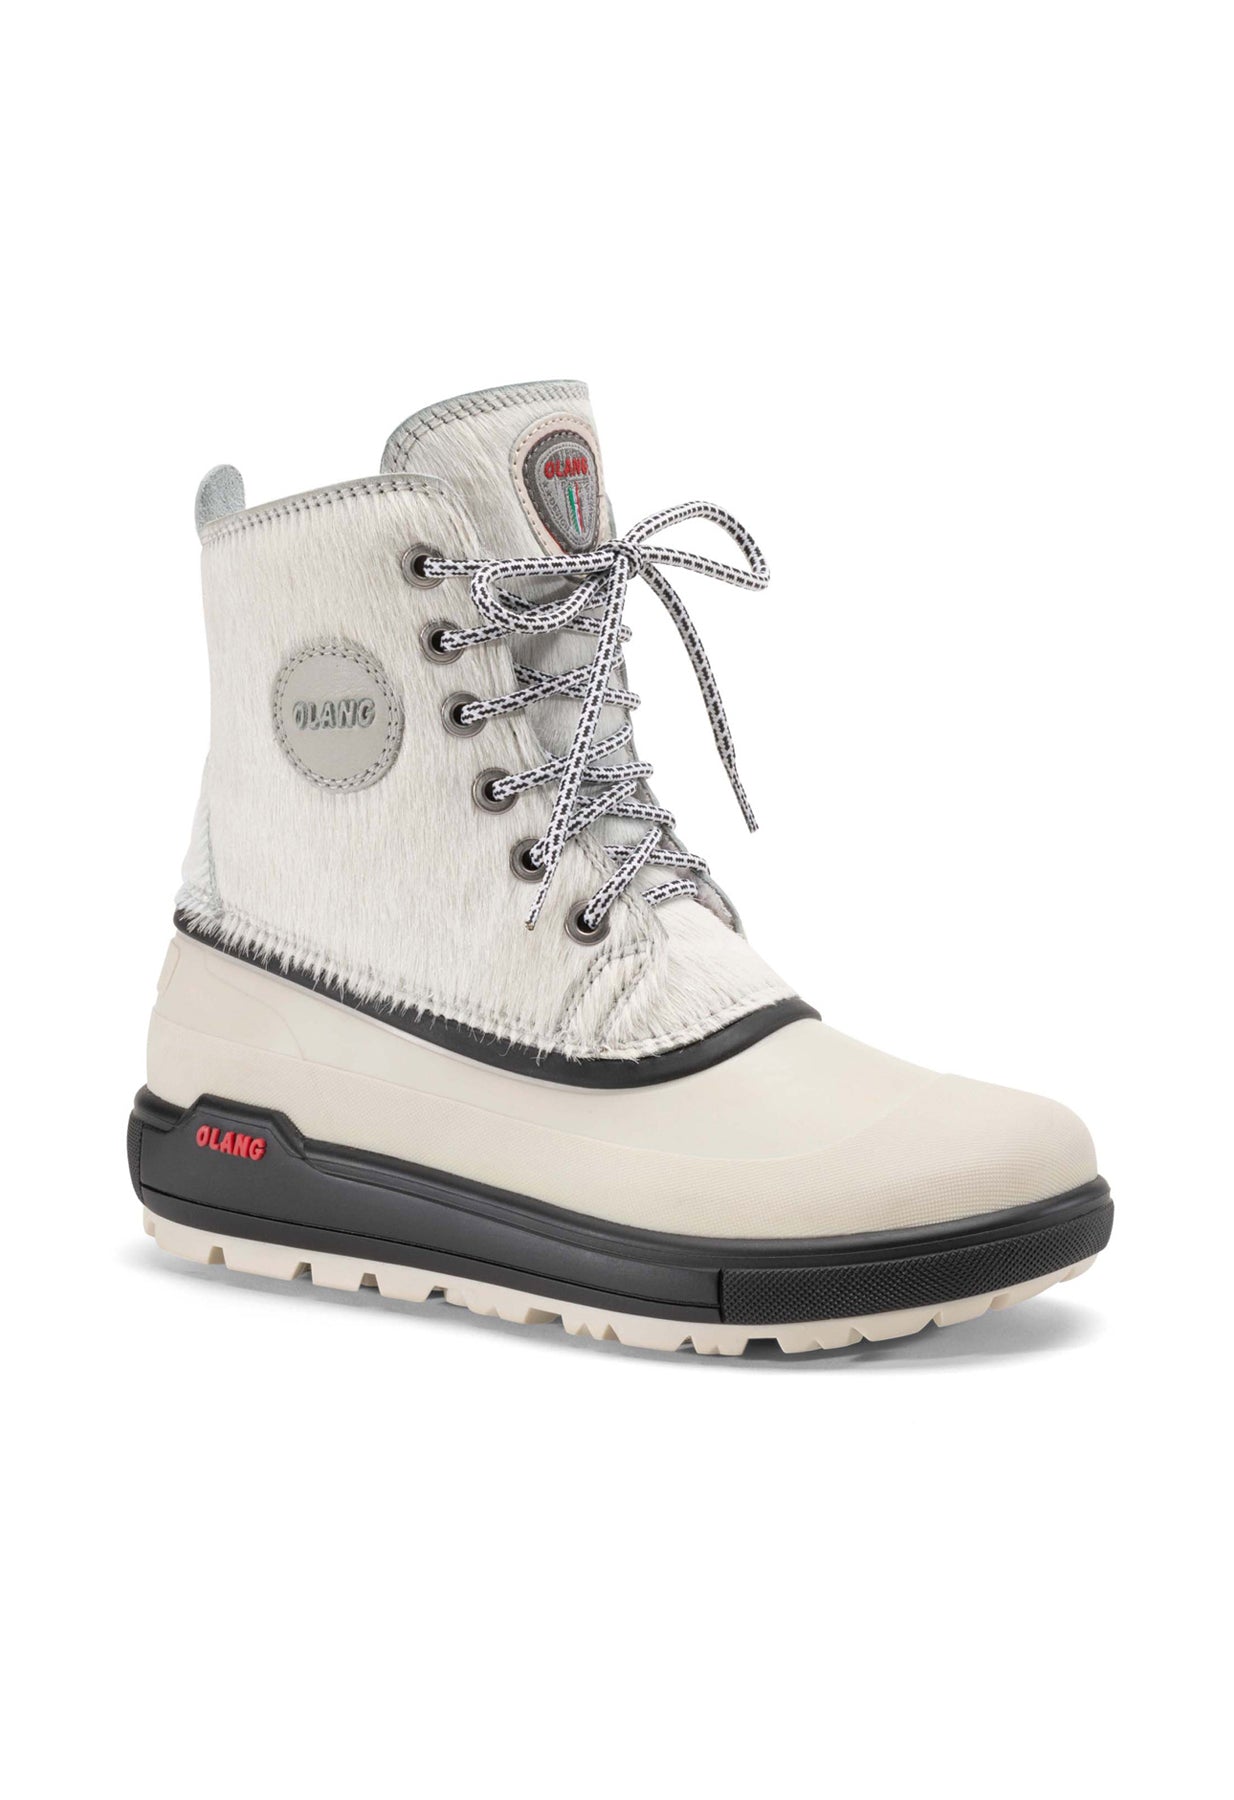 OLANG Kimberley Winter Boots in White